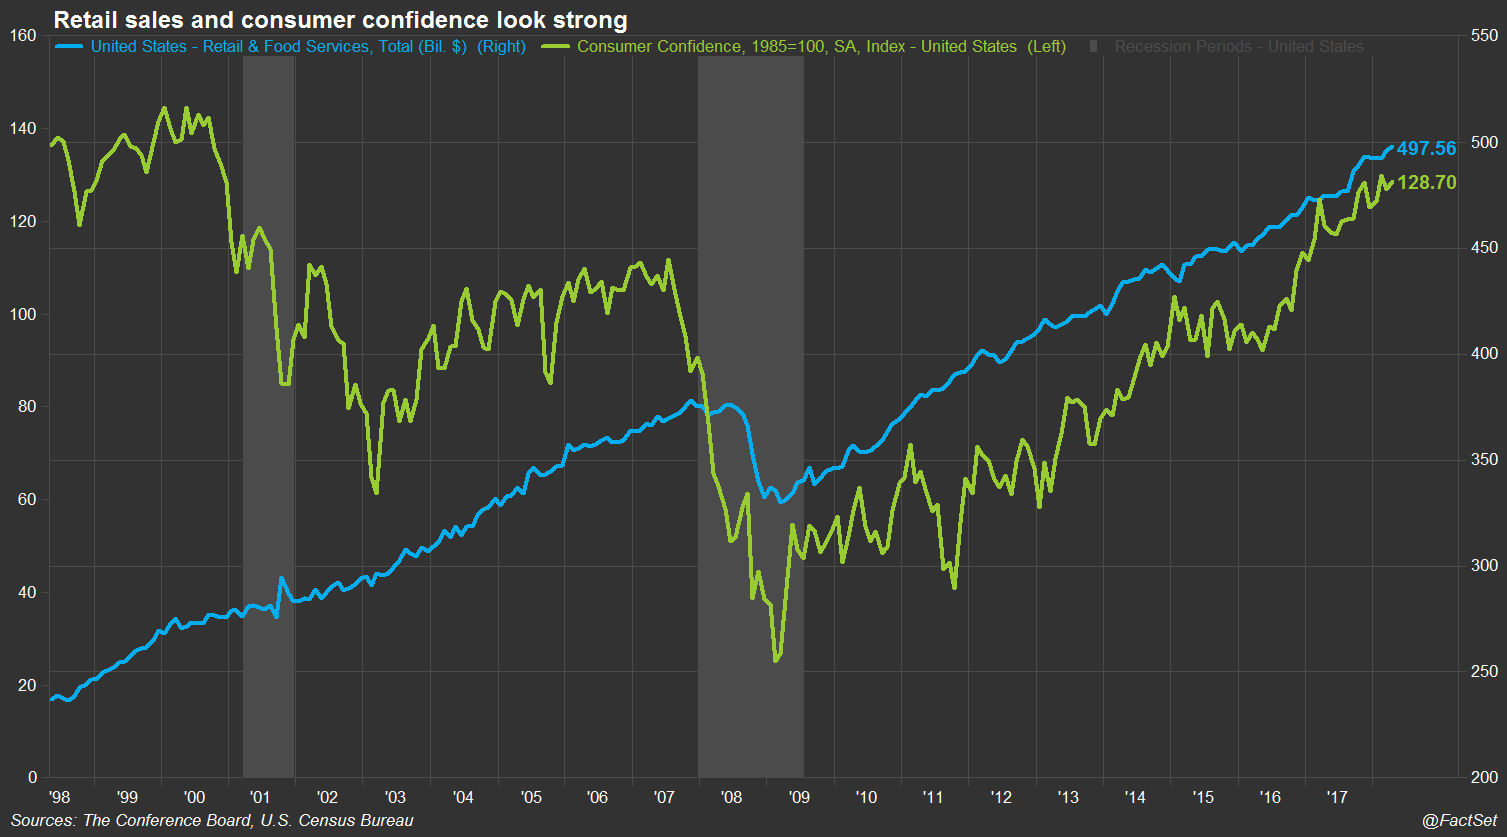 Retail sales and consumer confidence